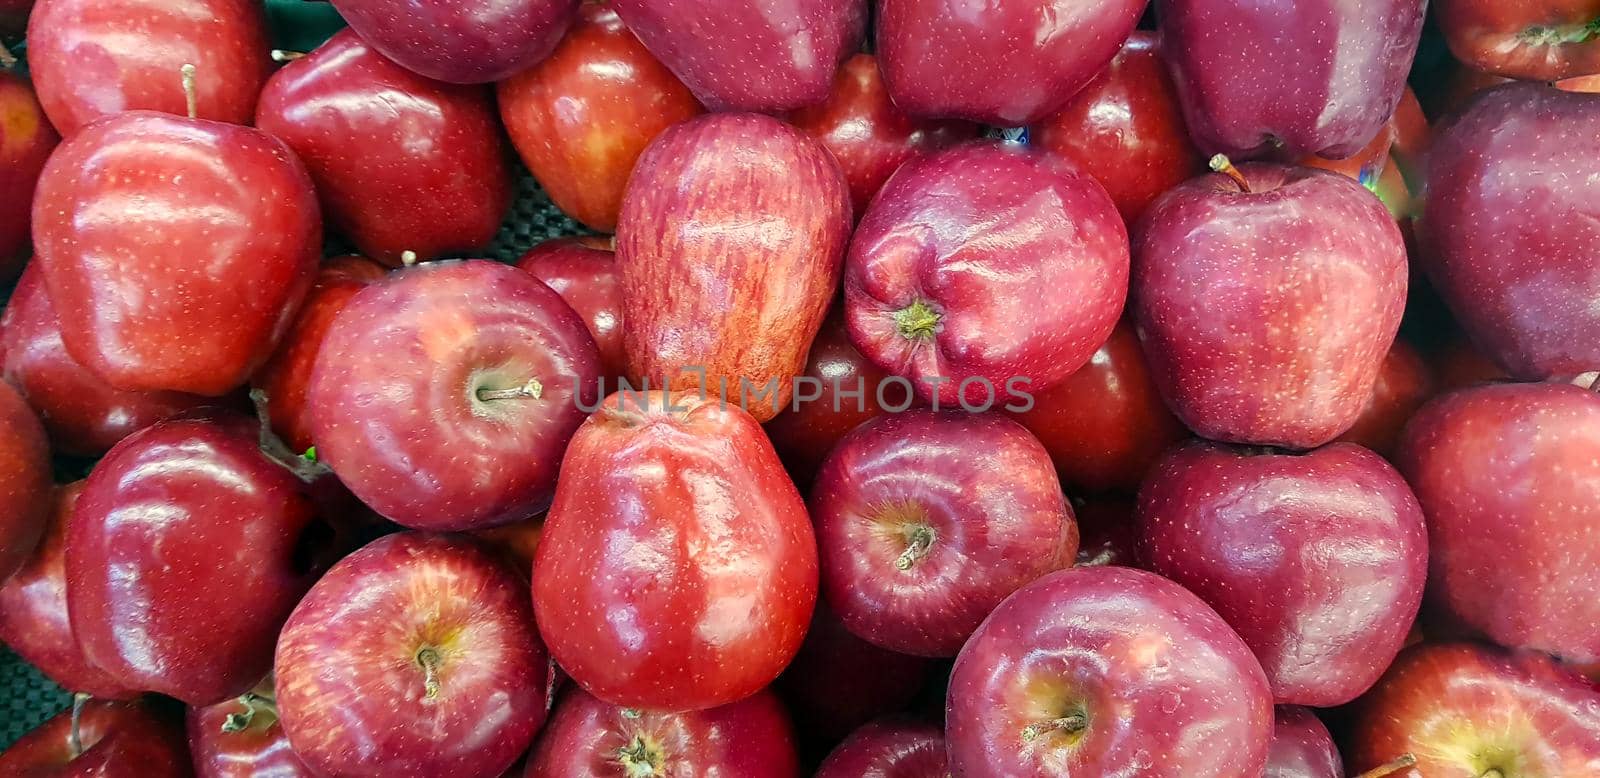 Fresh red apples good for multimedia background group of red ripe apples by antoksena